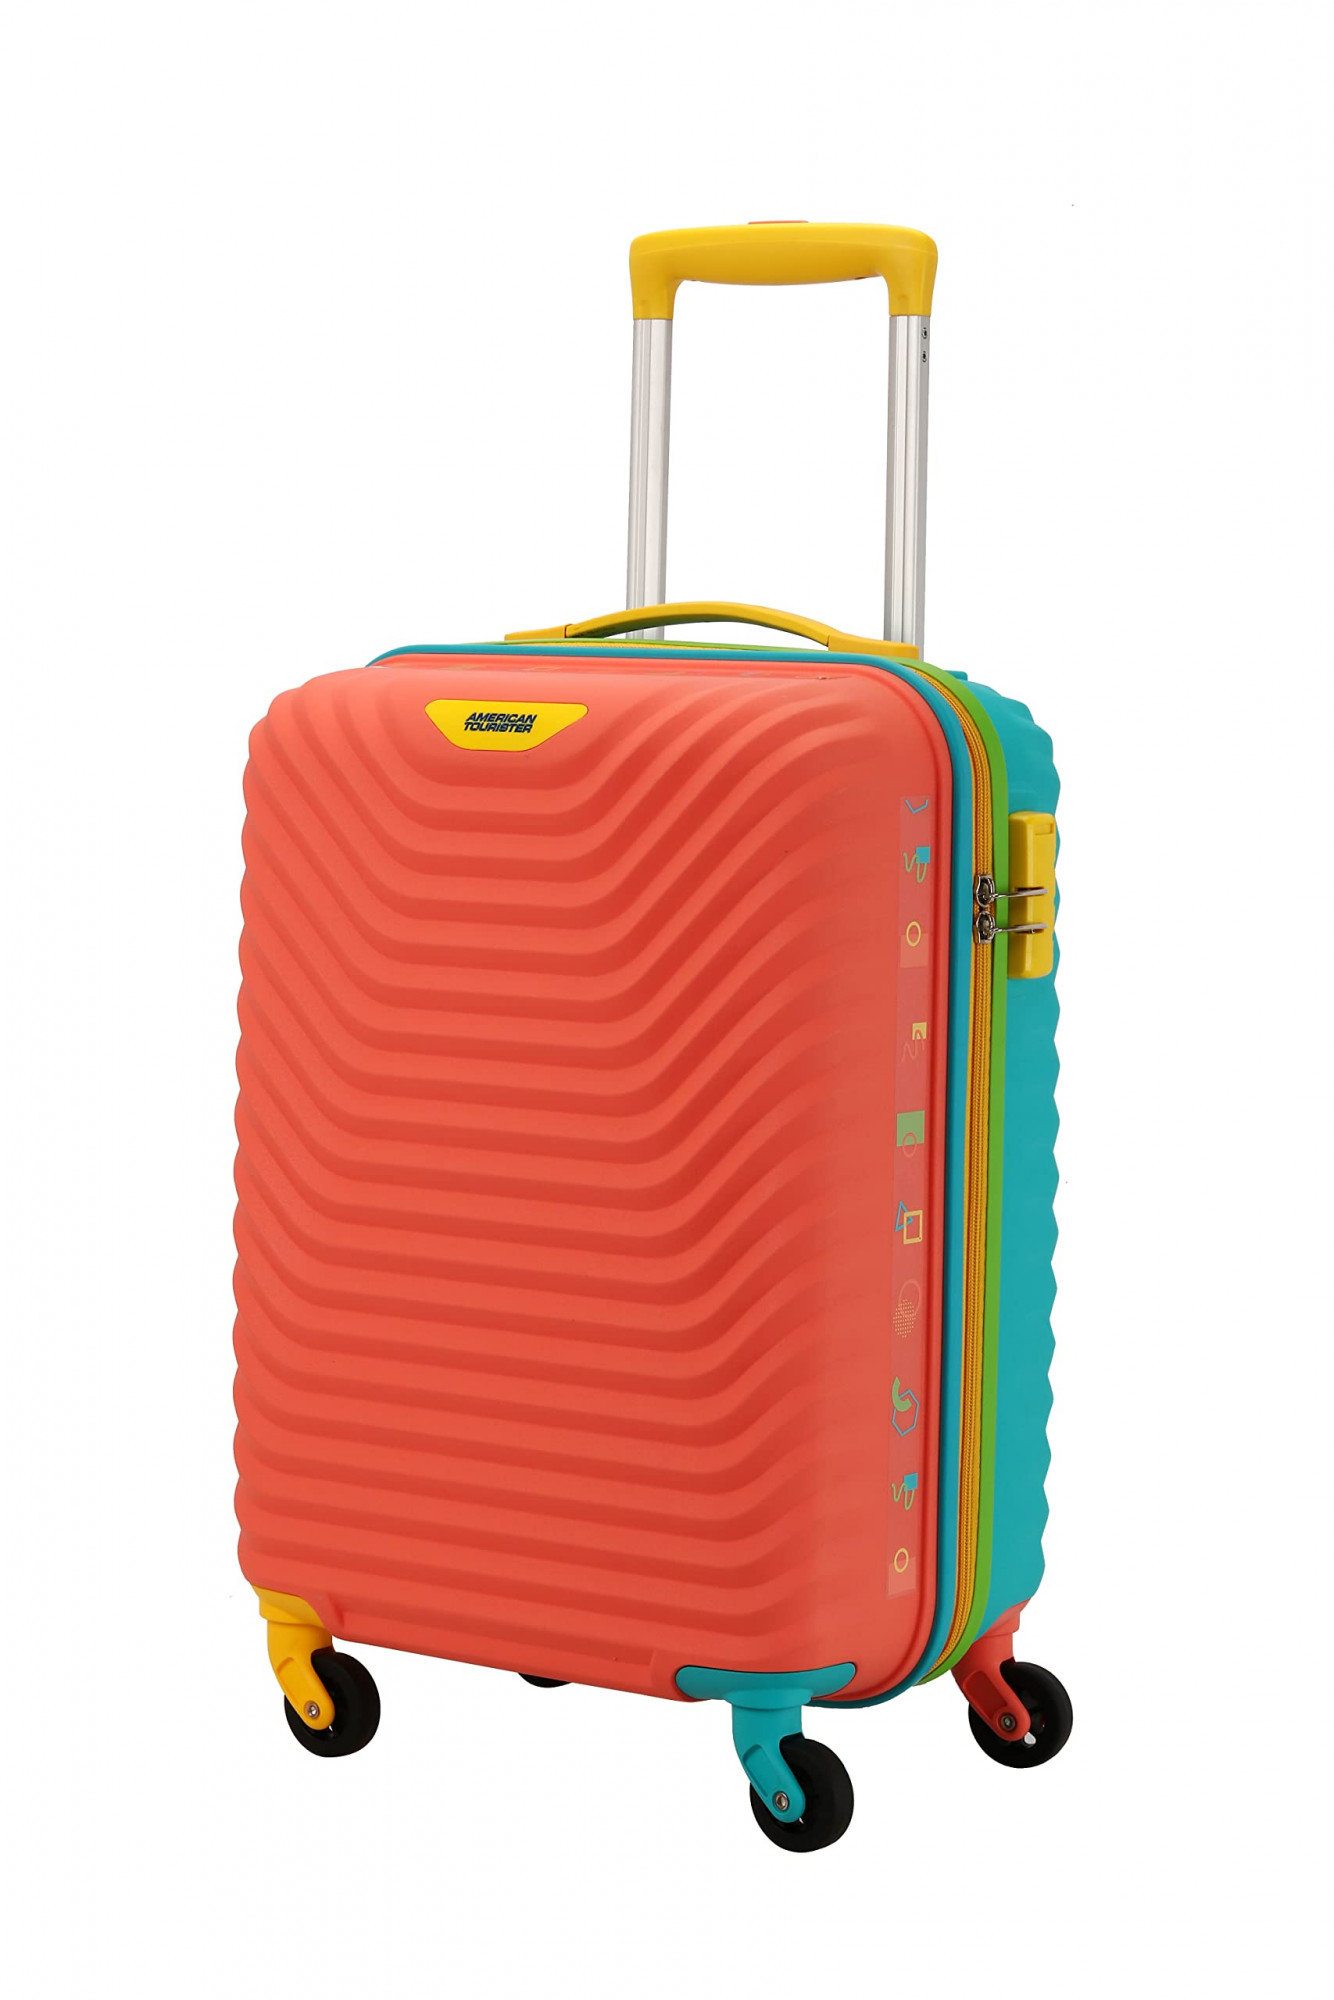 American Tourister Sprint Plus Spinner Manufacturers in Delhi, Noida,  Gurgaon, India | Corporate Gifts